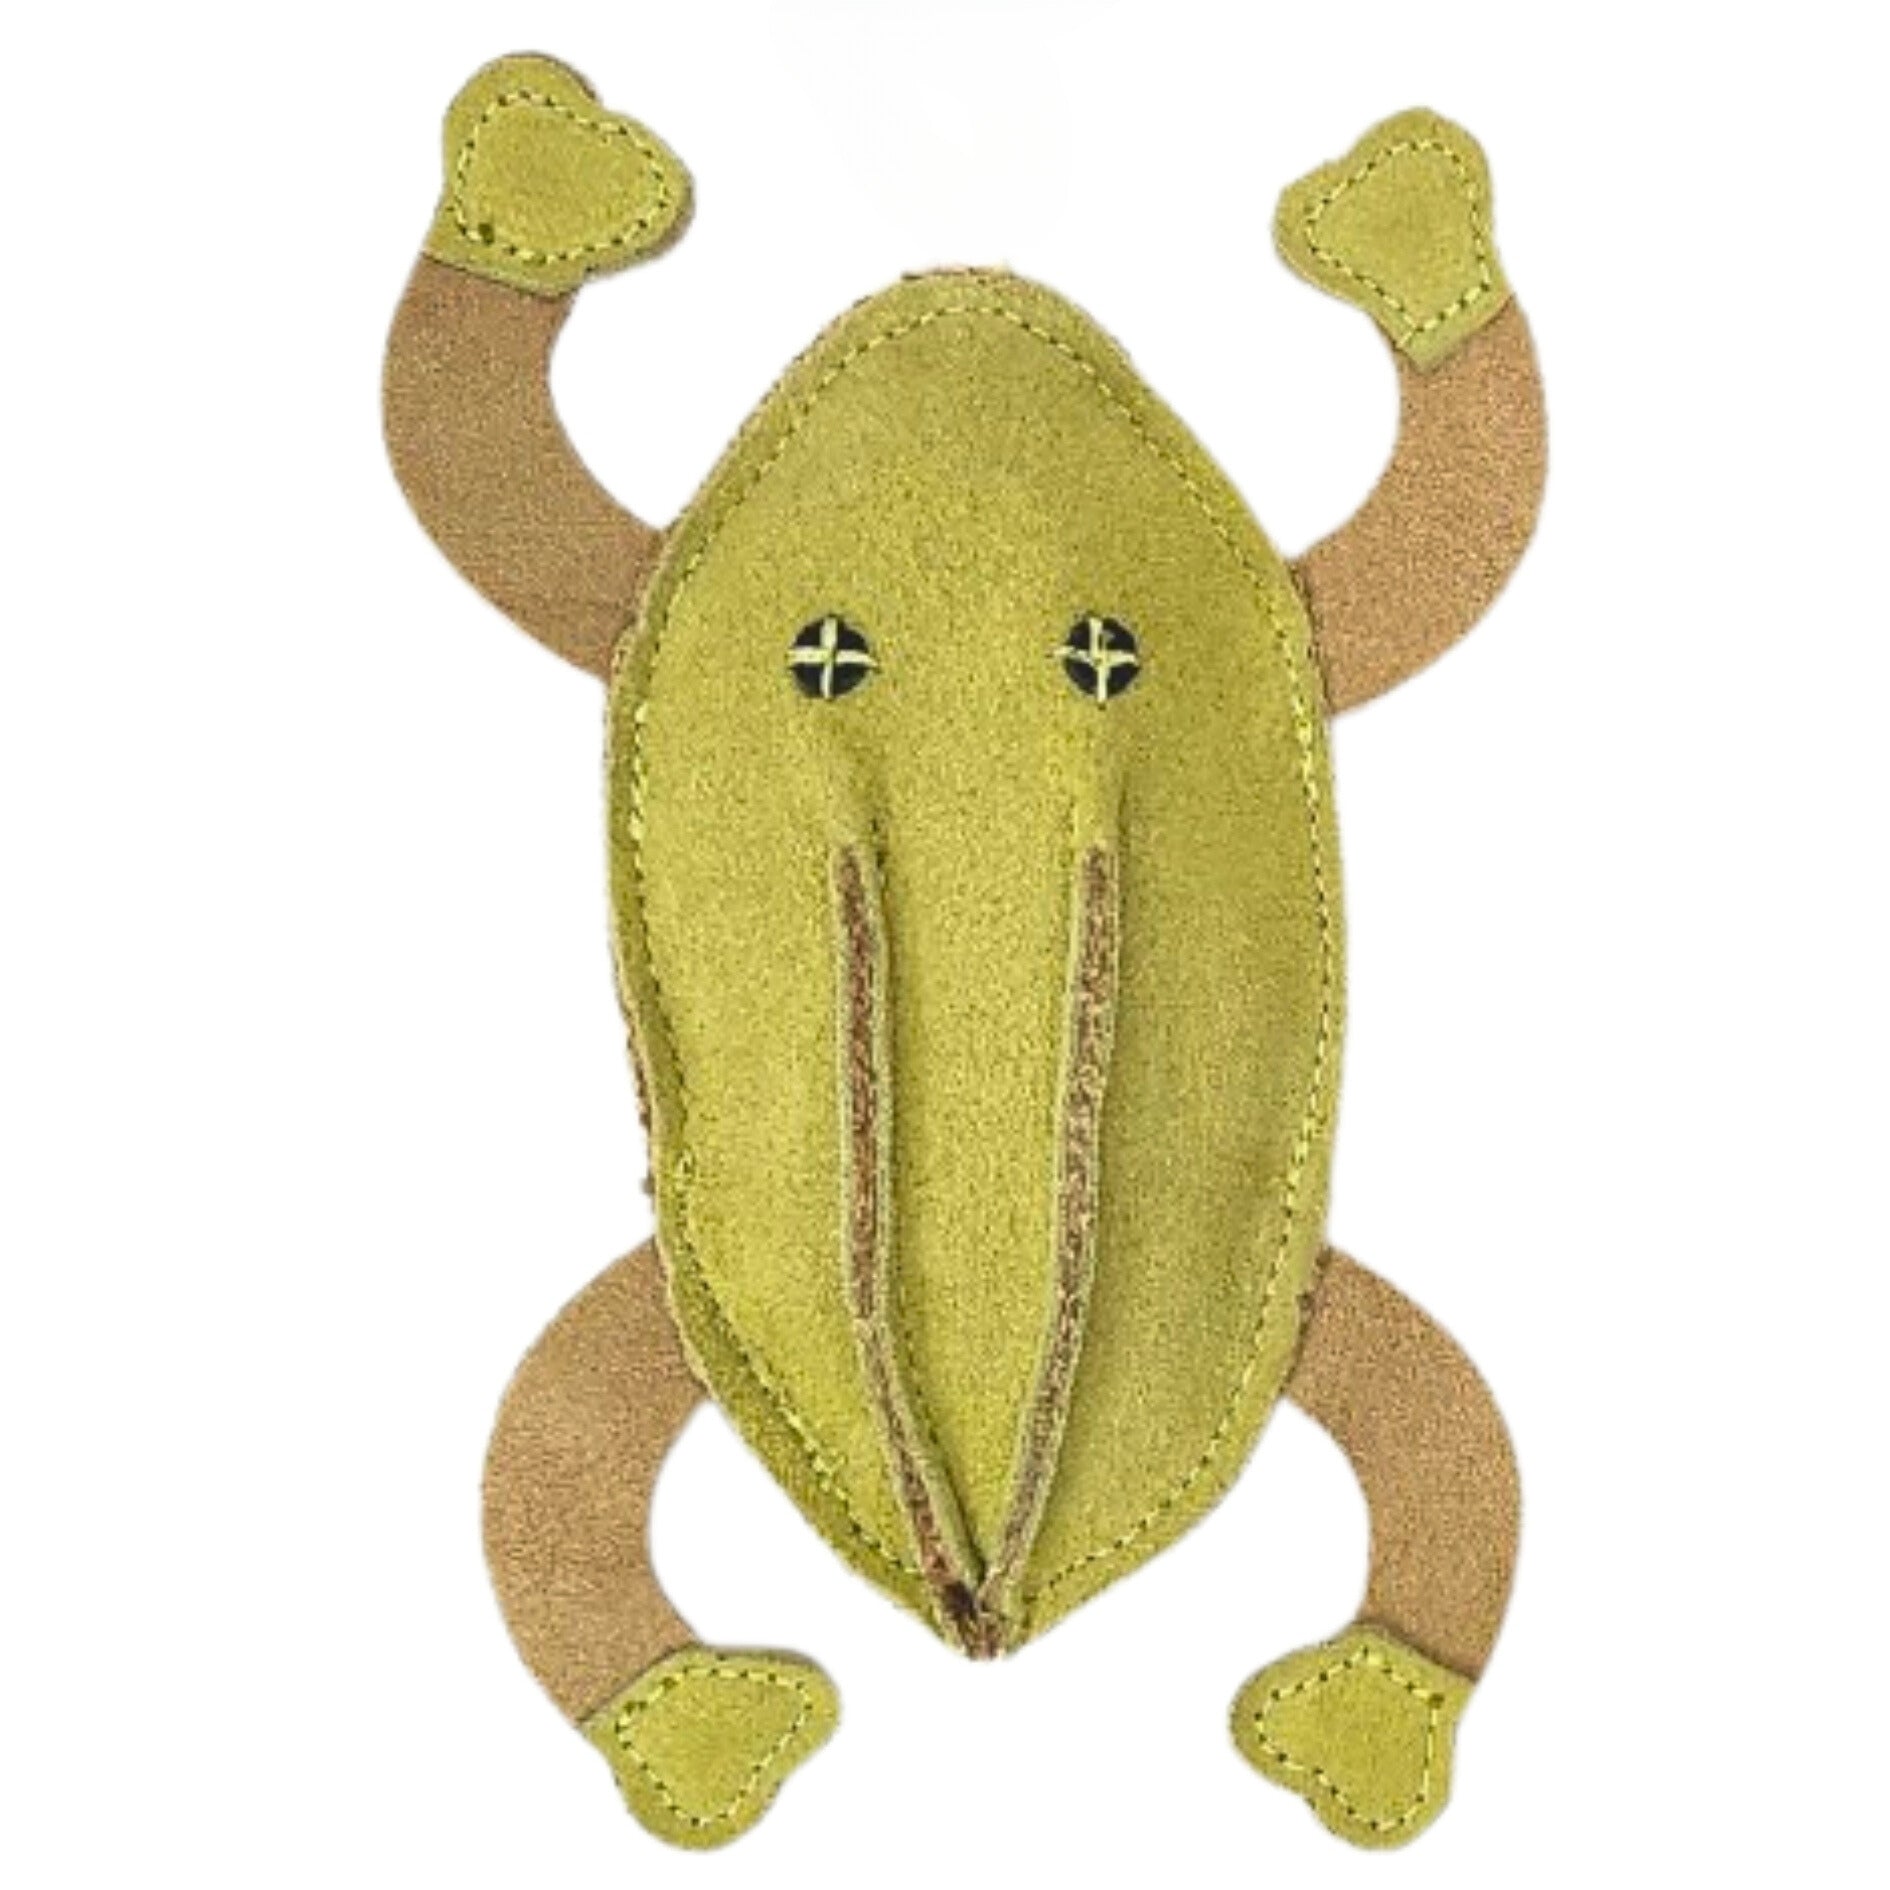 A cute Frog - Pear dogtoy by Georgie Paws on a white background.